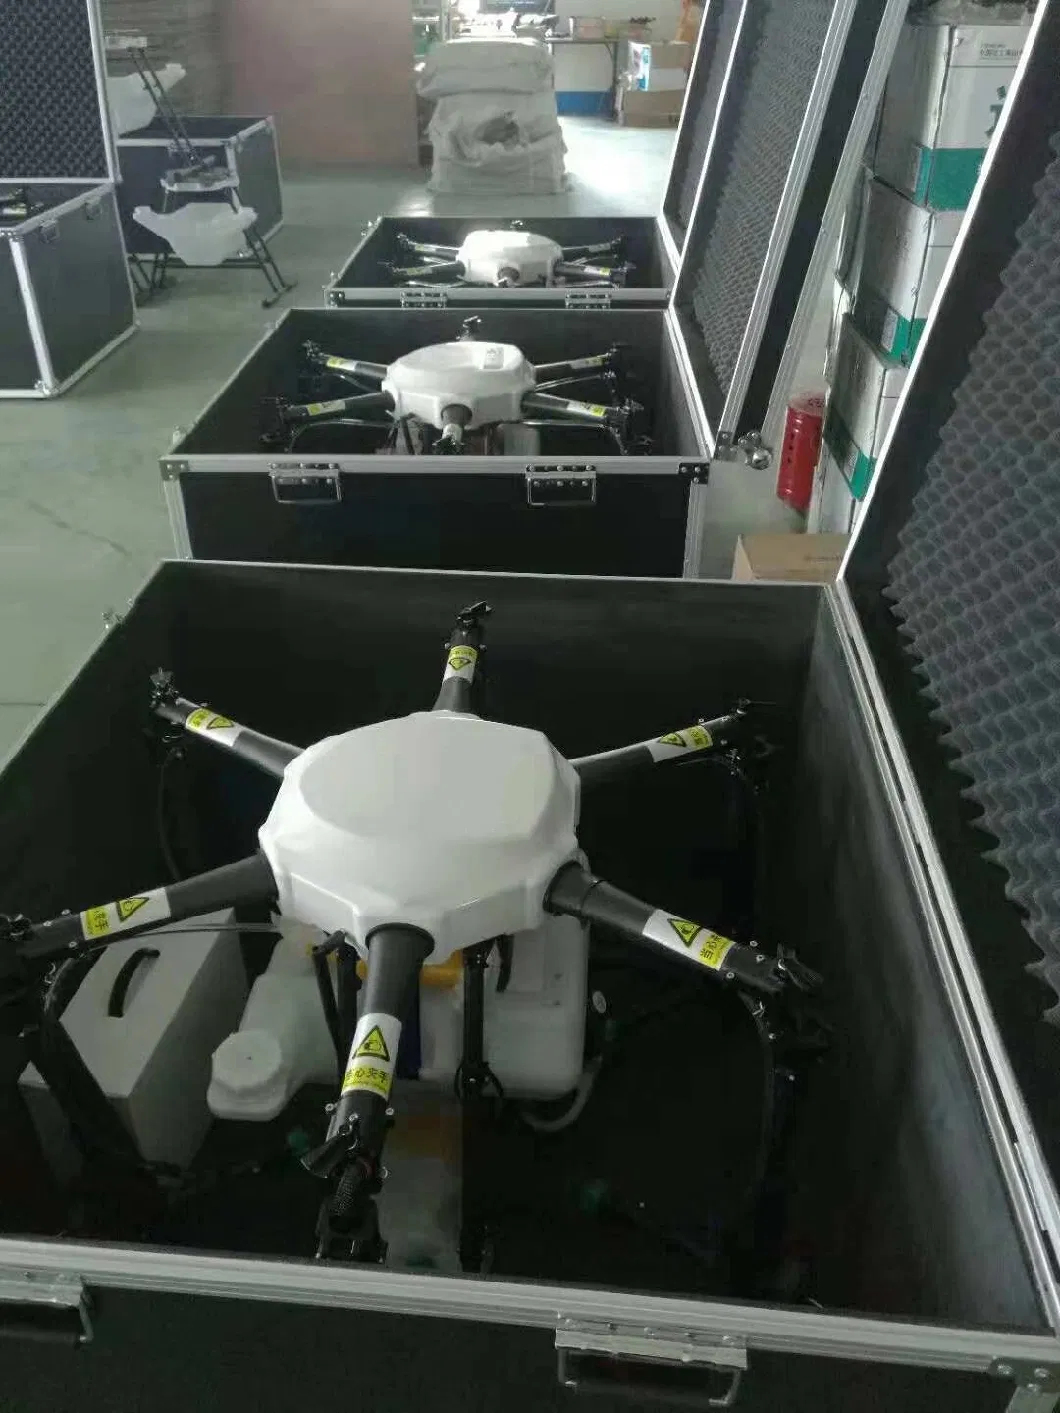 Agricultural Drone Usefulness Fumigation Drone Sprayer Agricultural Drone Technology